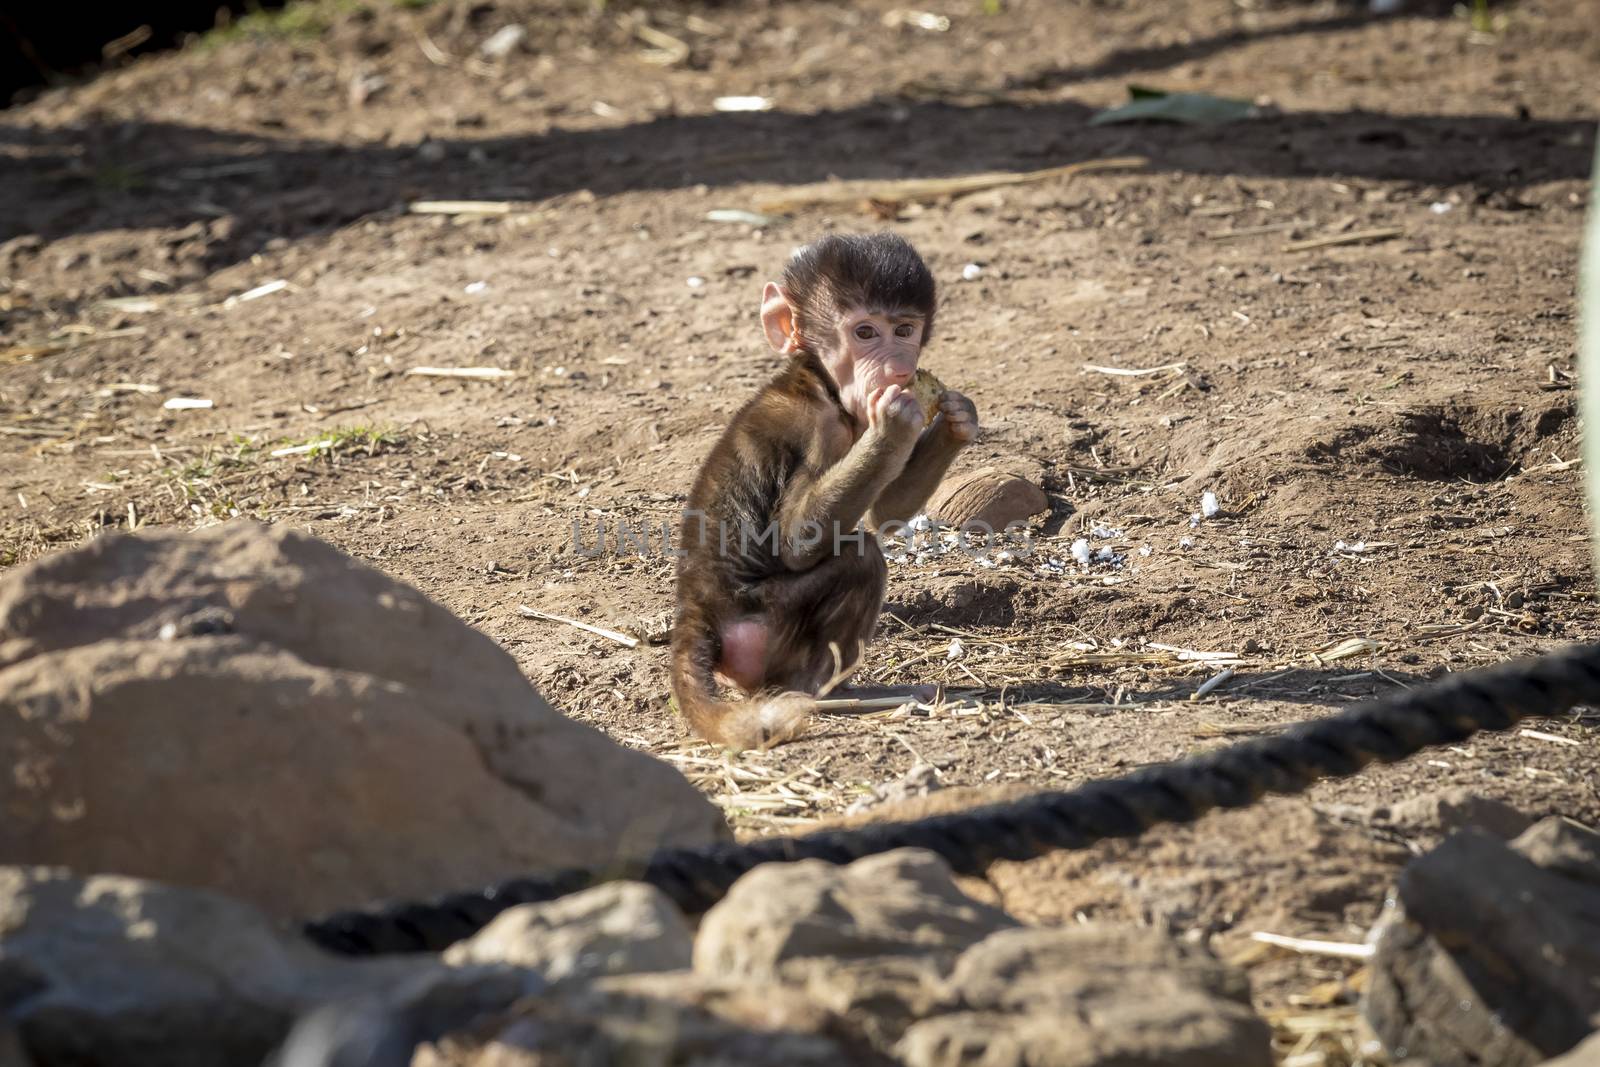 A baby Hamadryas Baboon eating food in the outdoors by WittkePhotos